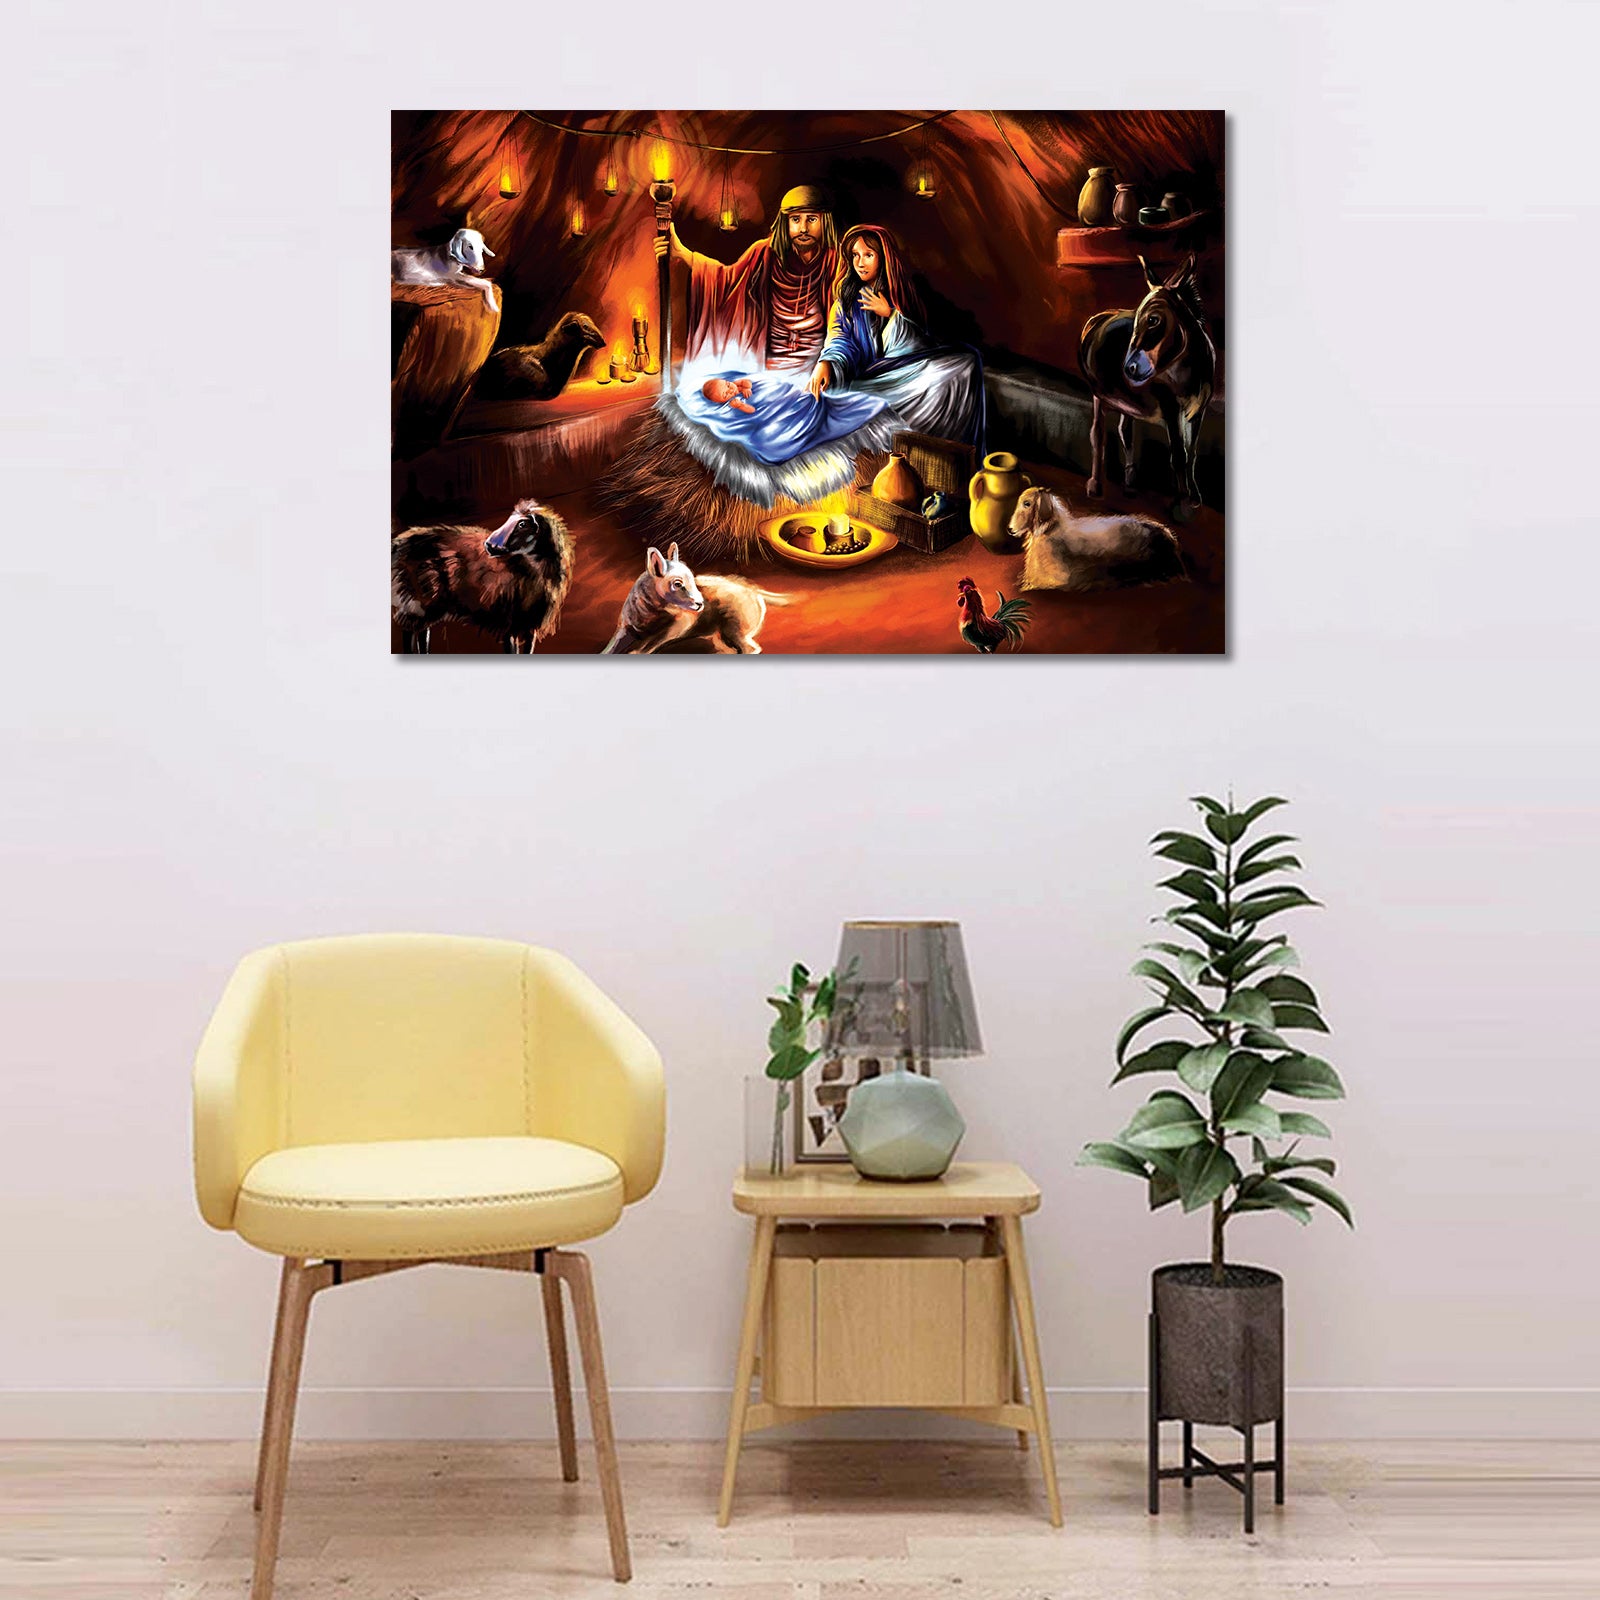 The Nativity of Jesus - Unframed Canvas Painting